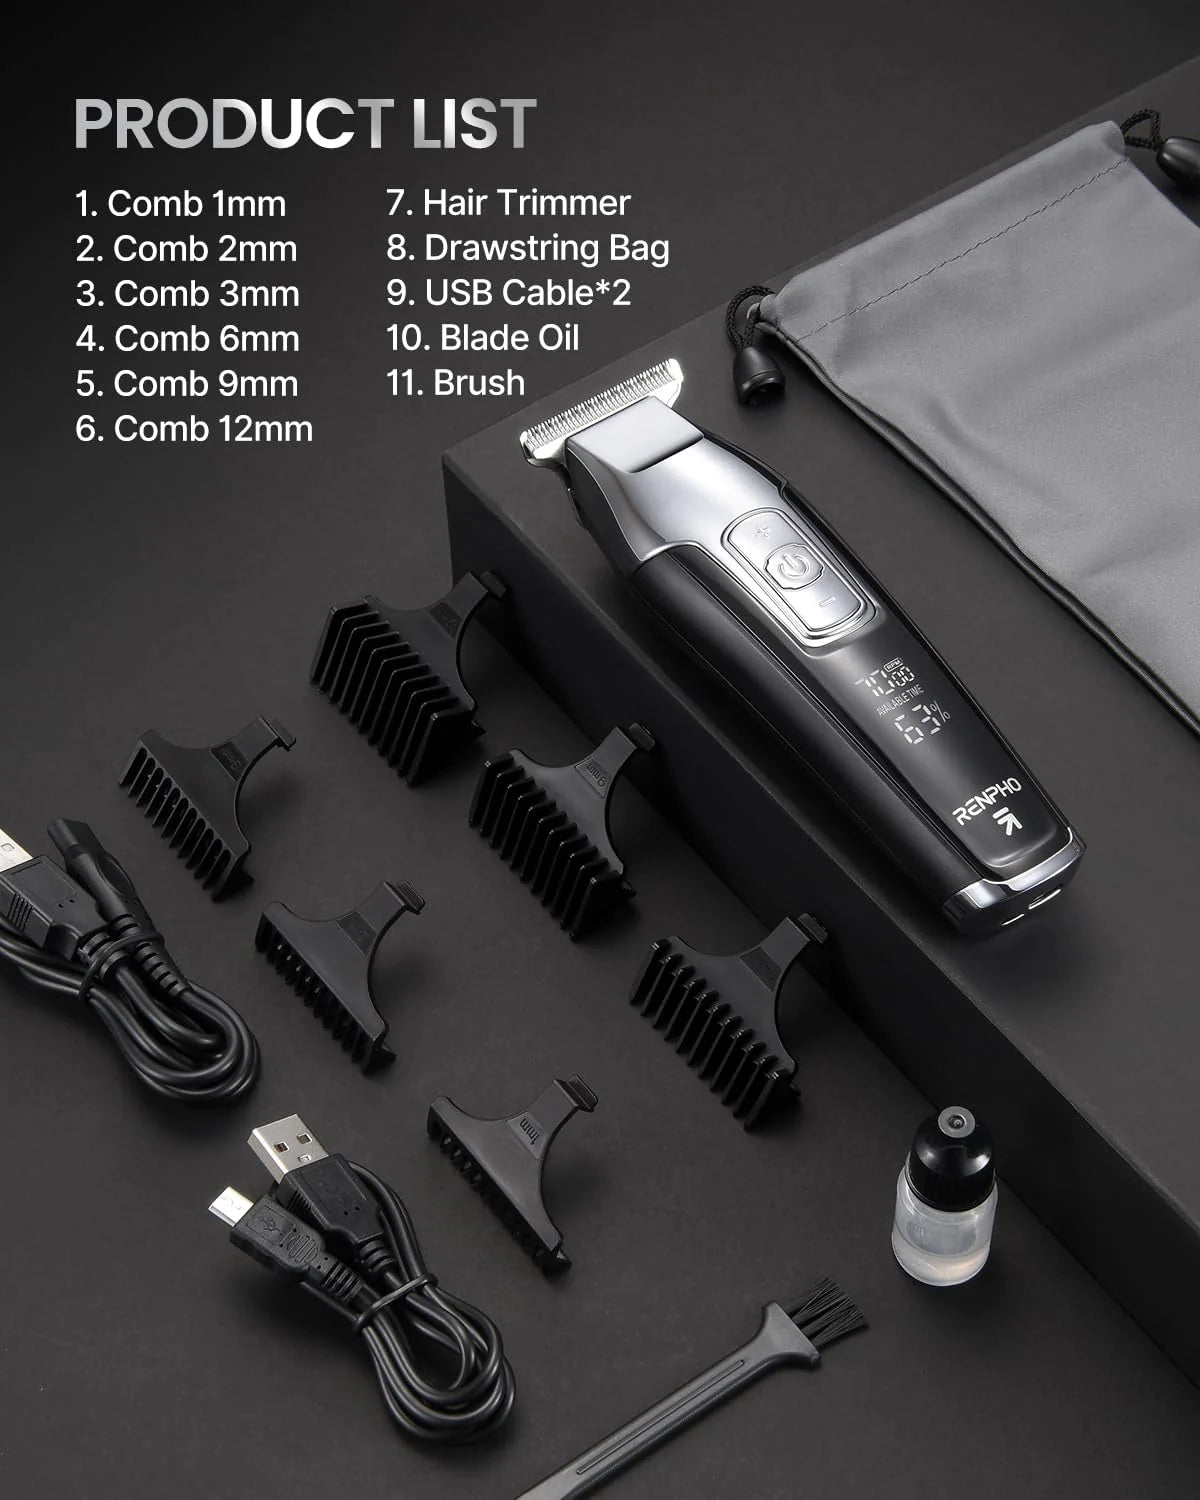 An image of a Renpho EU Professional Cordless Hair Trimmer and its accessories laid out on a black surface. Accessories include various comb attachments, a USB cable, blade oil, and a cleaning brush. Text labels each item.